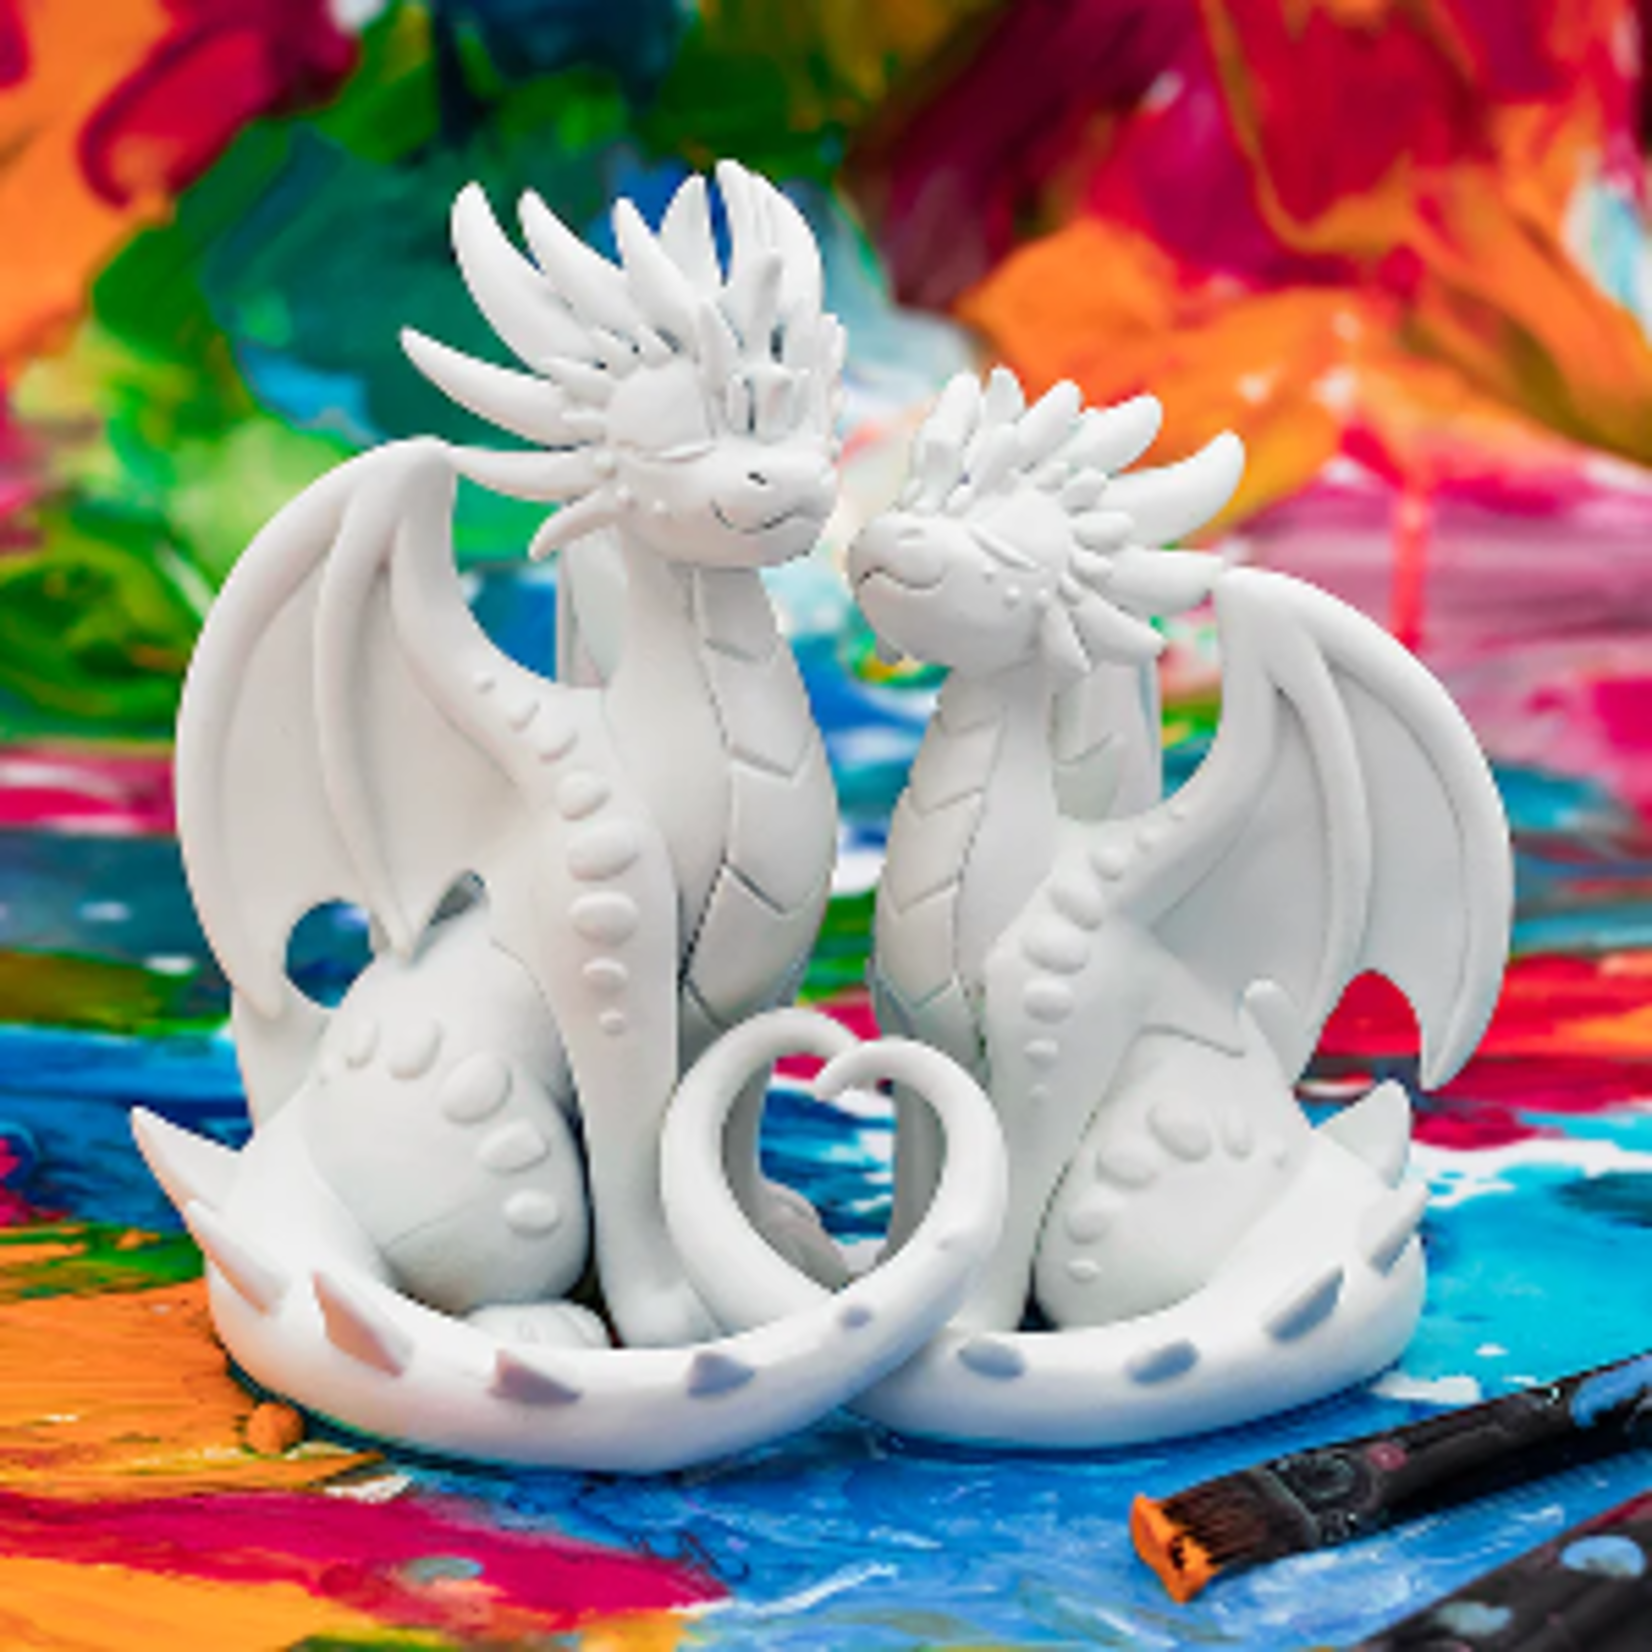 Dragons & Beasties Dragons and Beasties: Paint Your Own Figure - Infinite Heartails